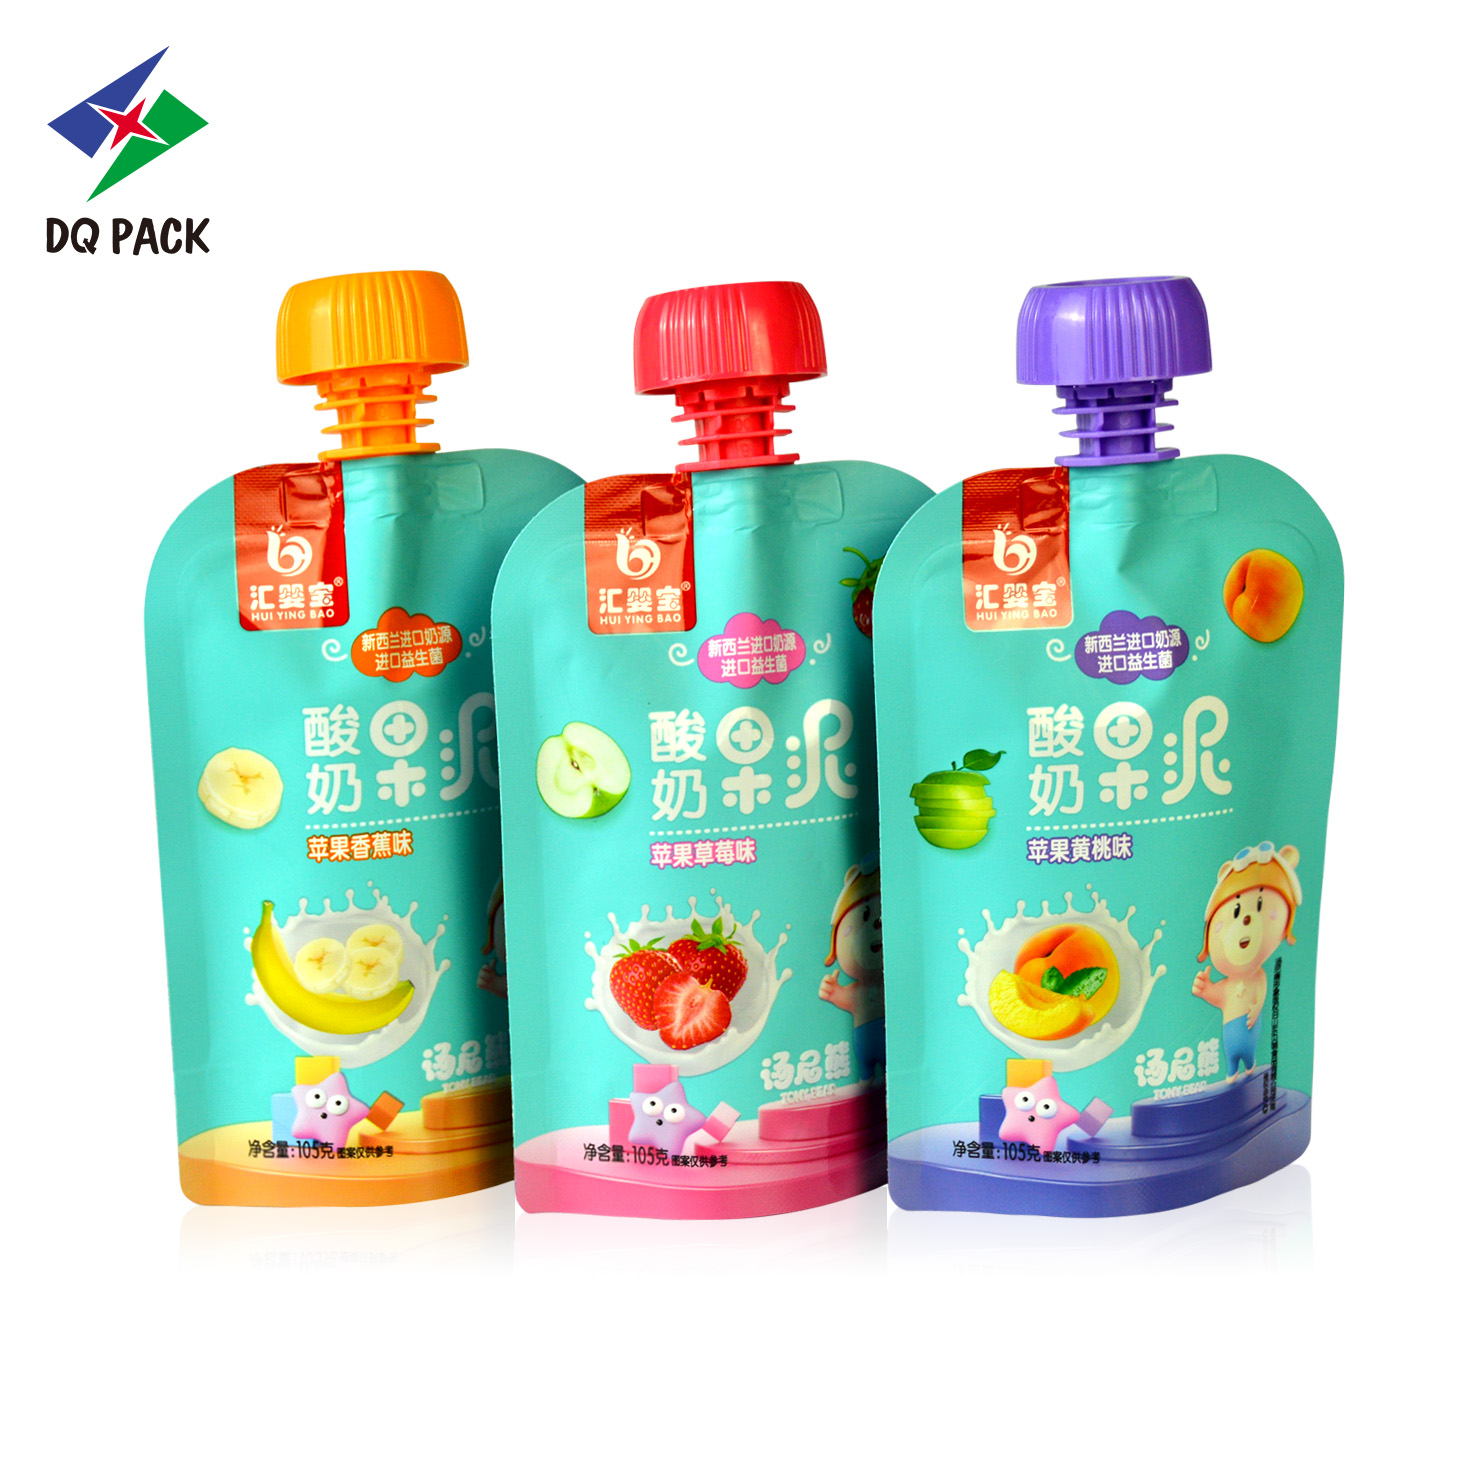 DQ PACK Colorful Design 105g Fruit Puree Stand Up Spout Pouch Food Grade Plastic Packaging Bag Featured Image